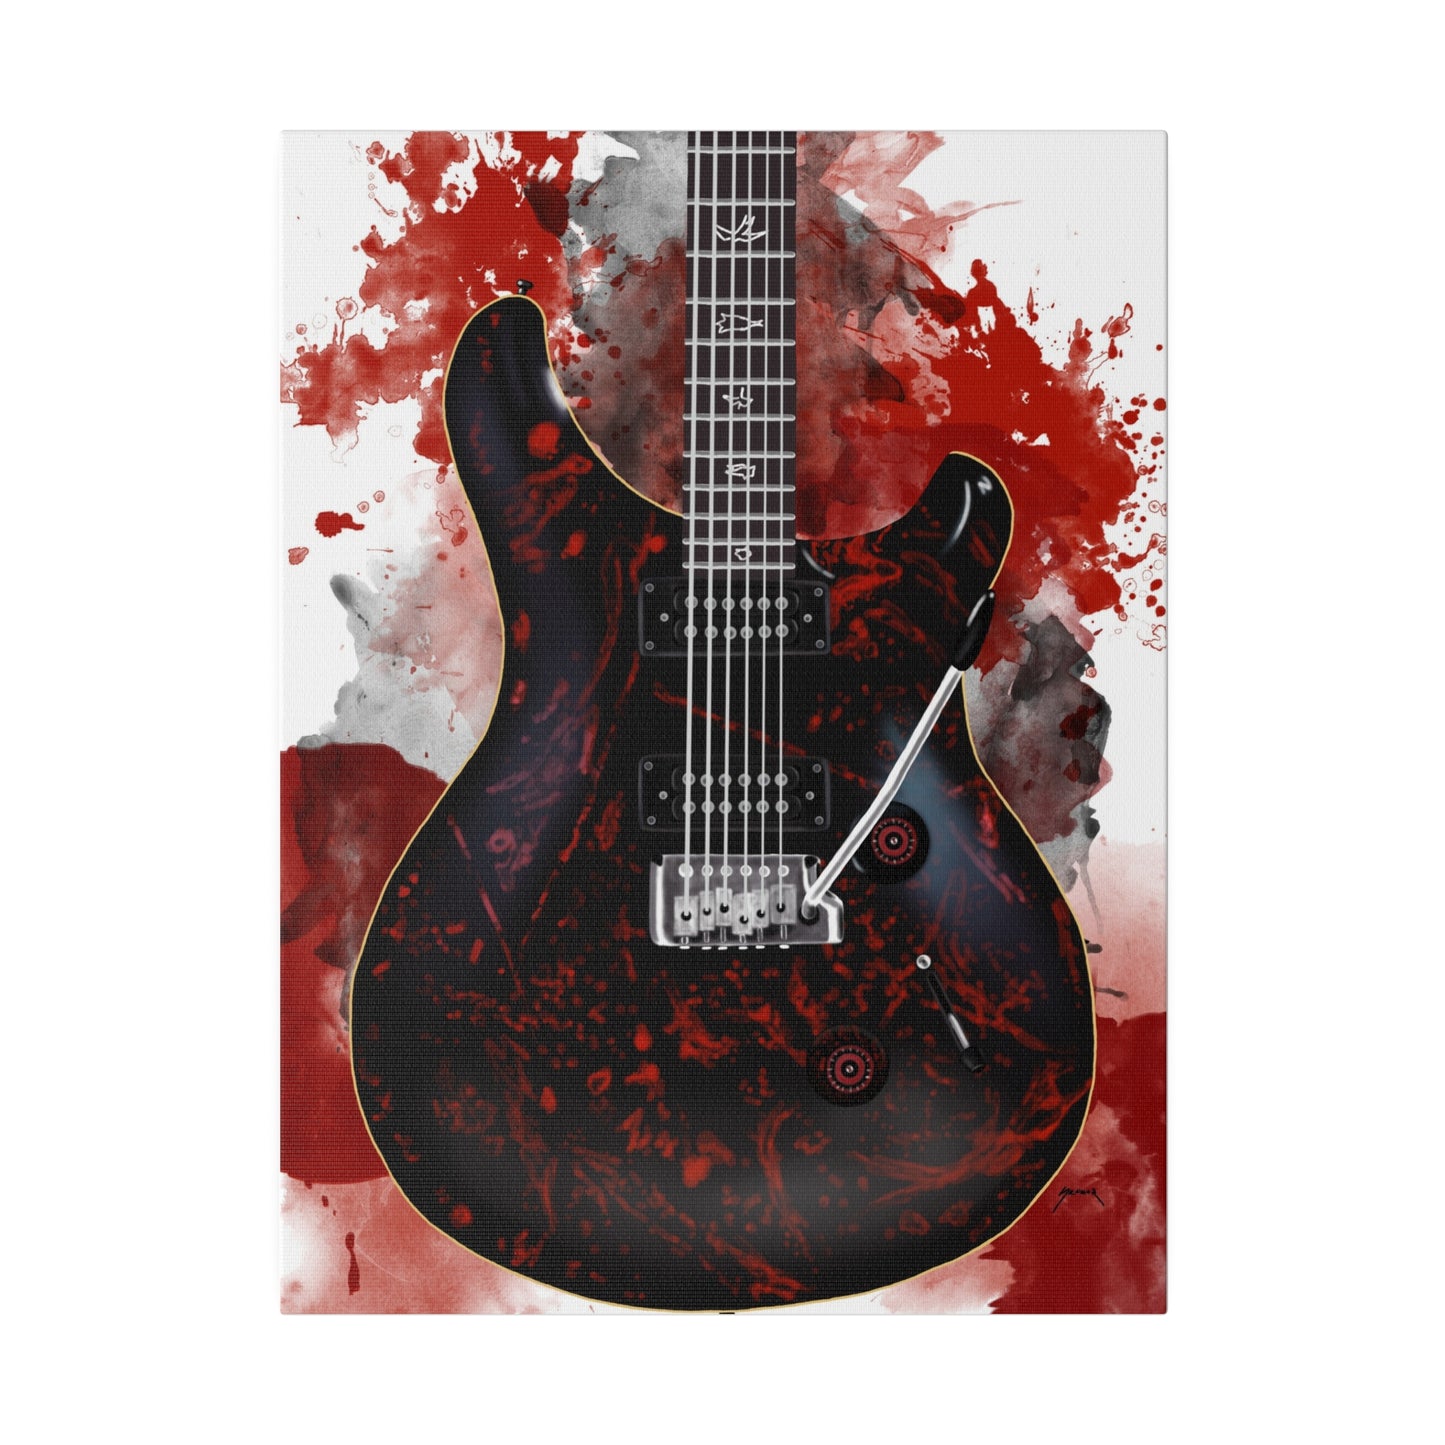 Digital painting of a blood splattered electric guitar printed on canvas